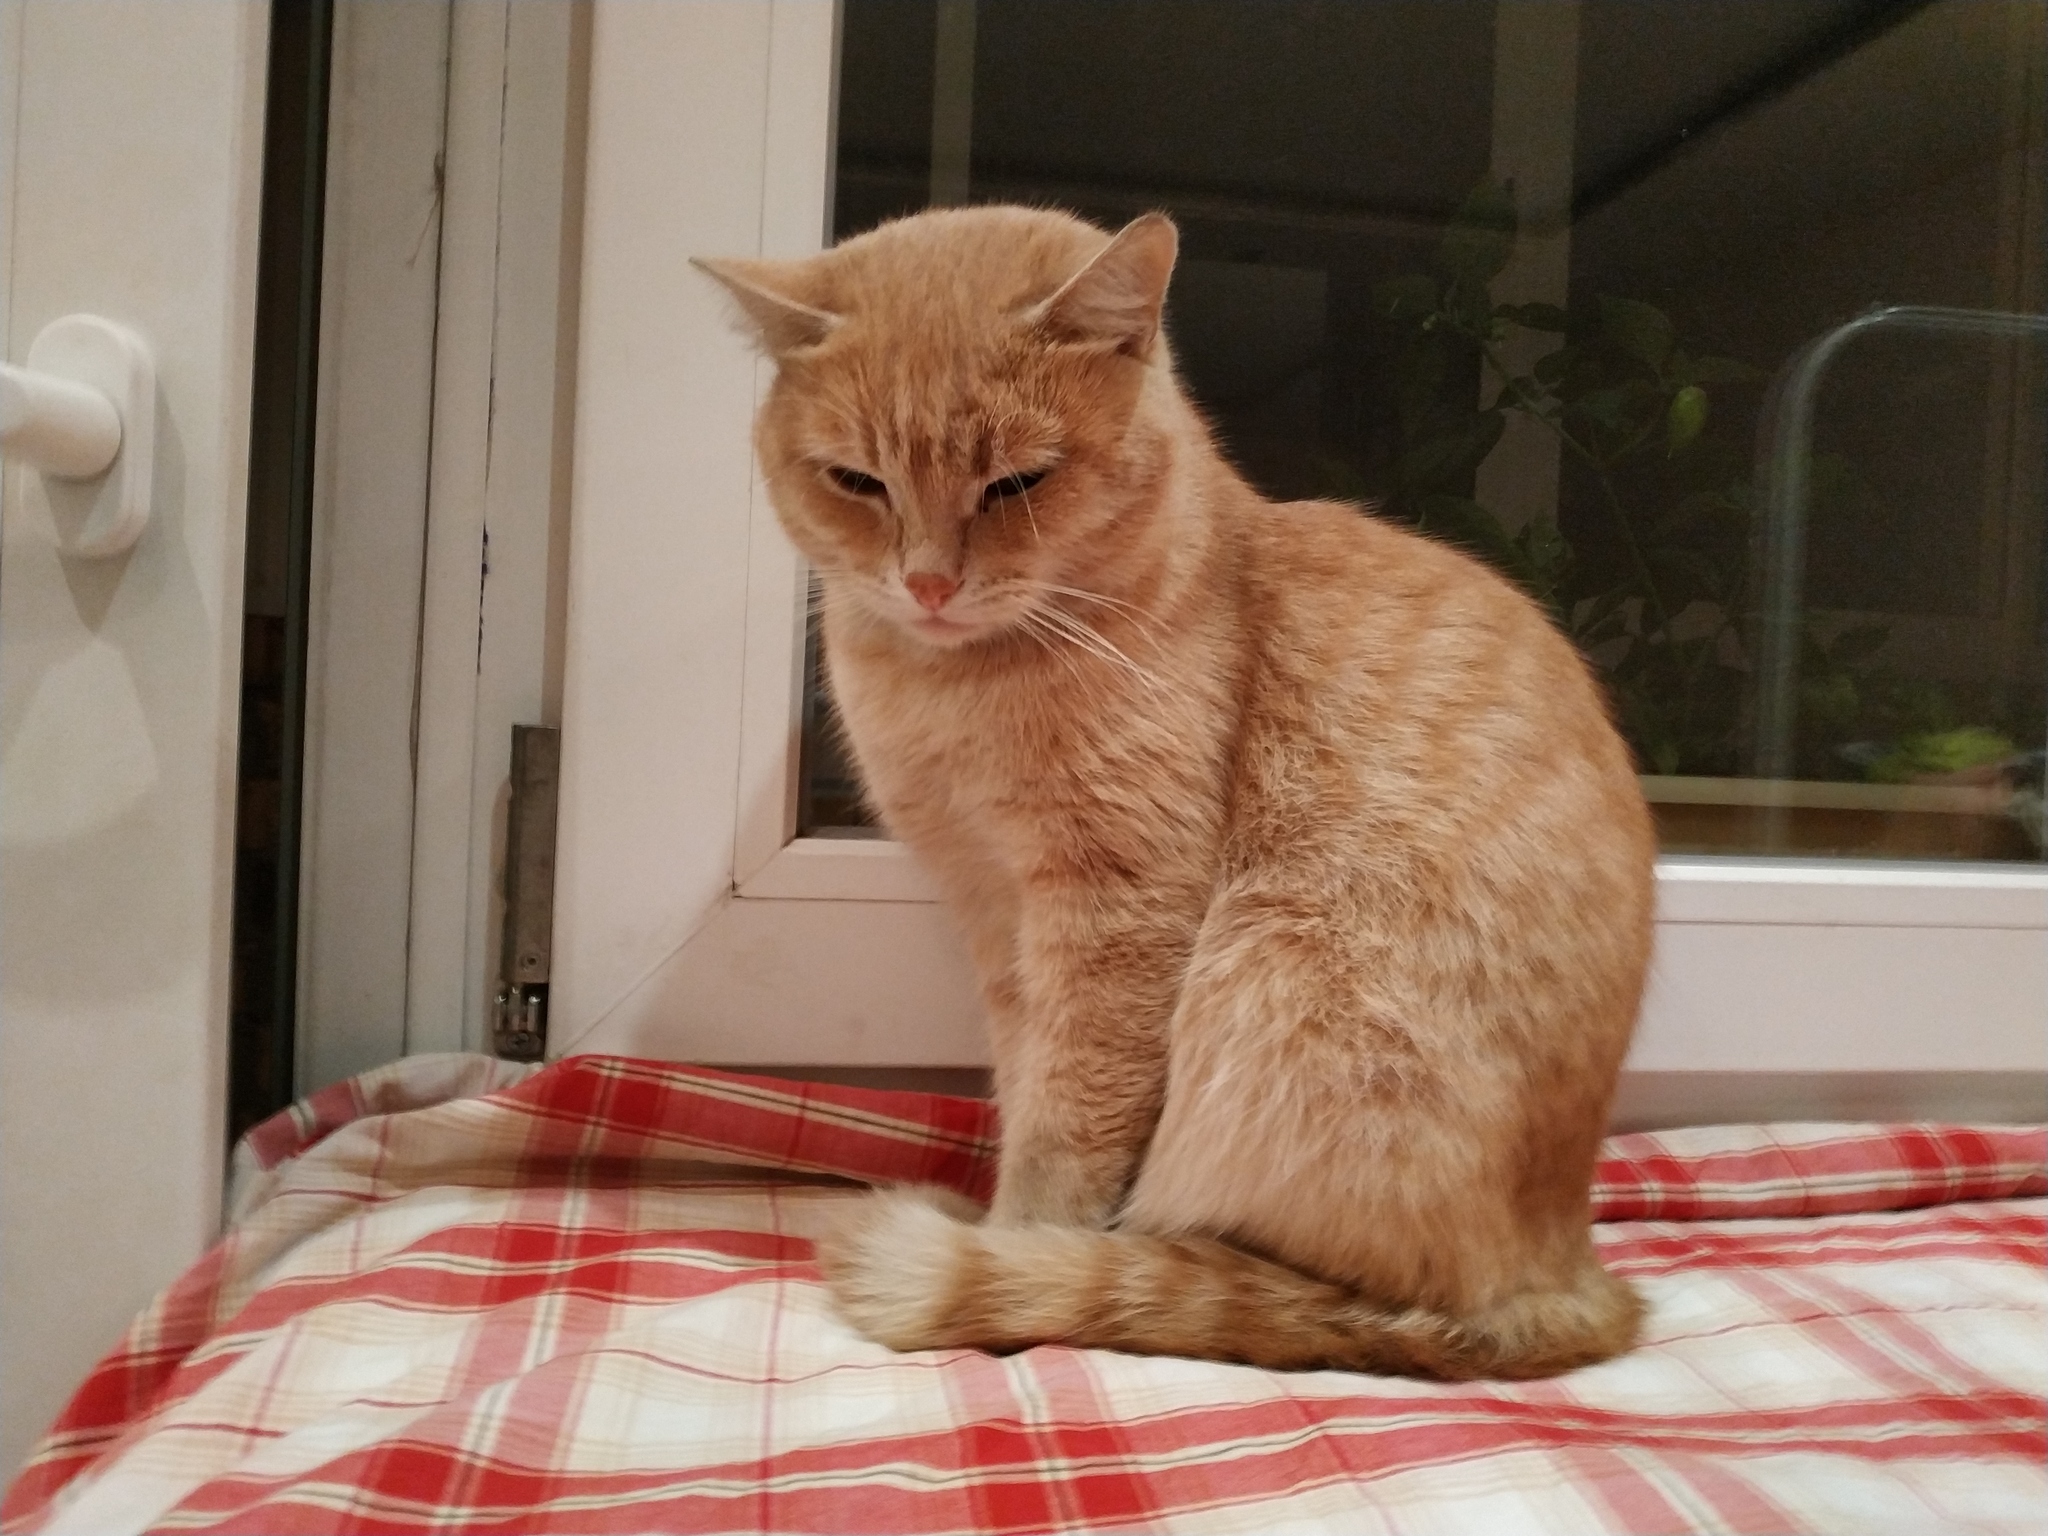 Red cat found - My, cat, Dolgoprudny, Moscow region, Lost cat, No rating, Longpost